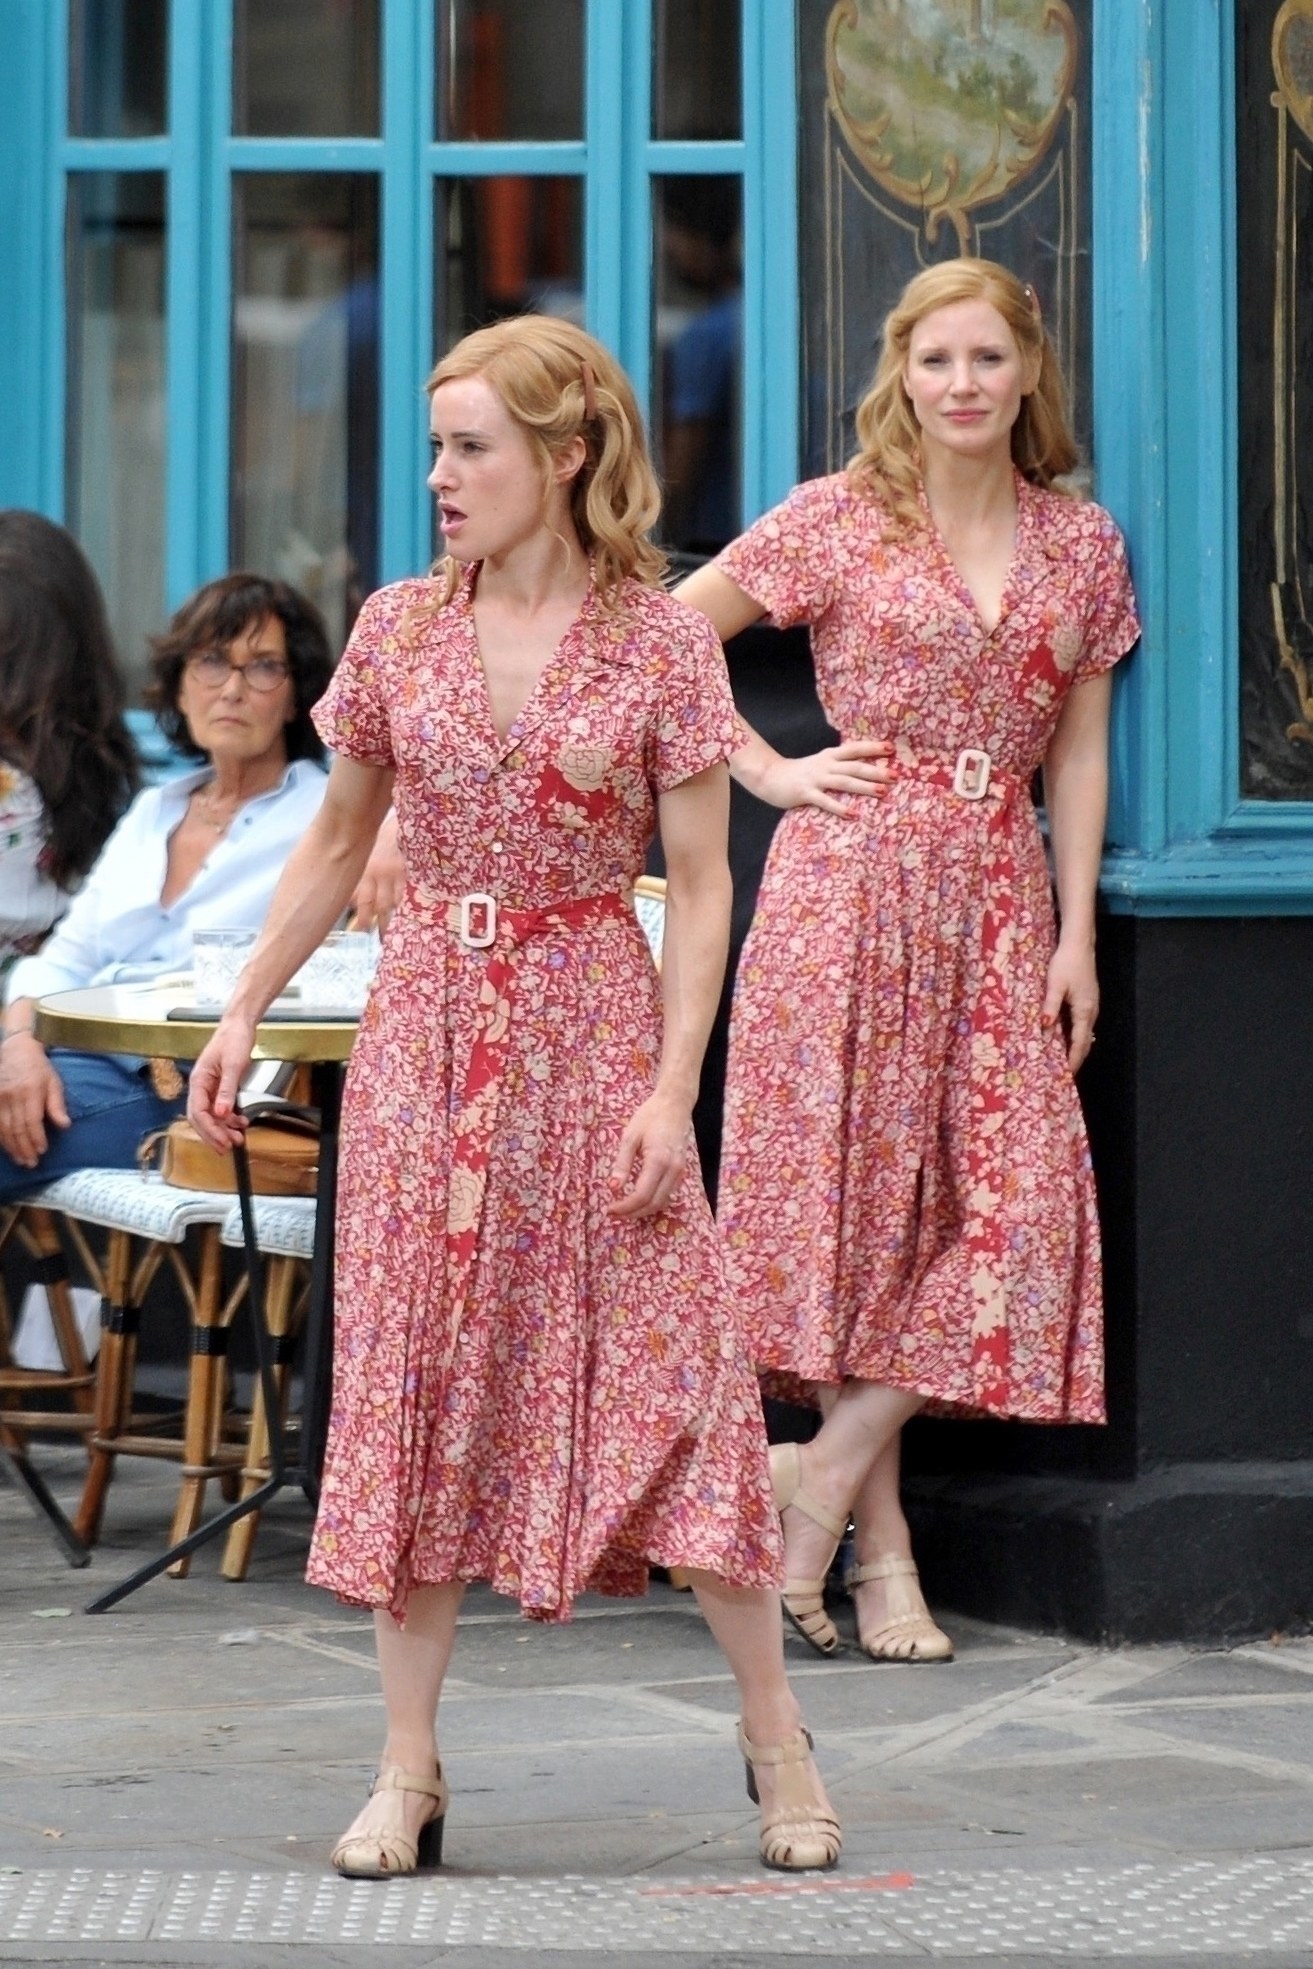 Jessica Chastain and her stunt double sporting matching floral dresses and nude heels